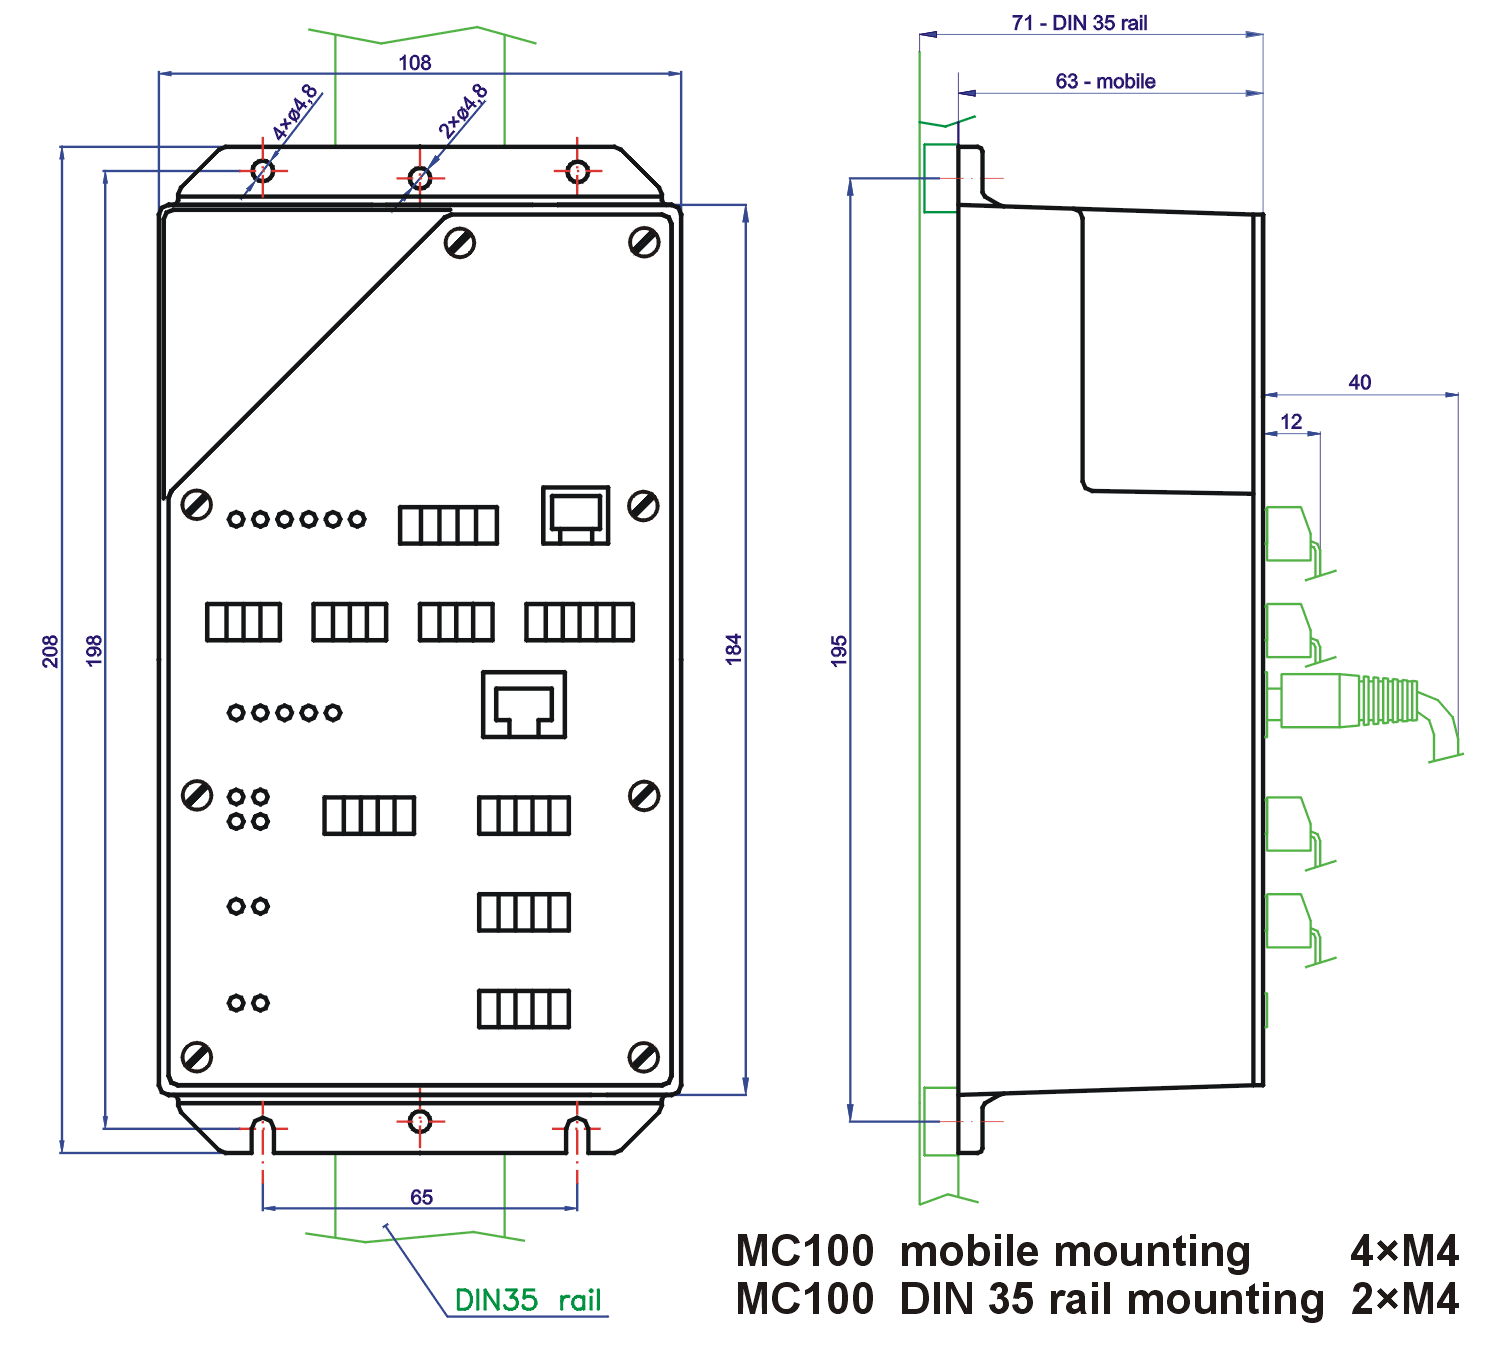 Mounting dimensions of the controler MC100